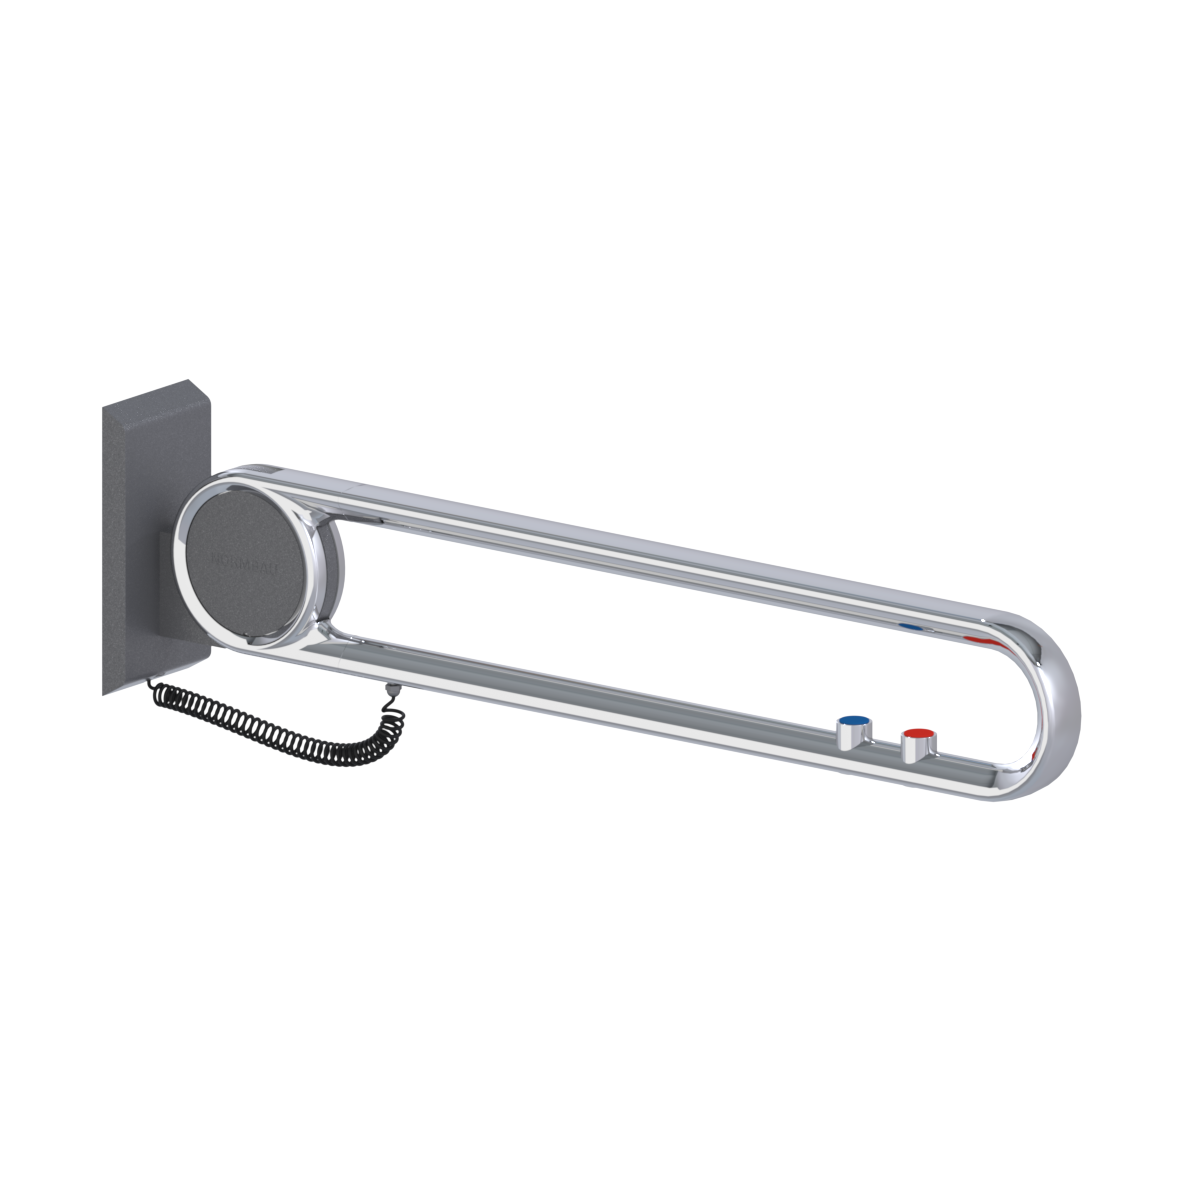 Cavere Care Chrome Lift-up support rail vario, with base plate, with 2 E-buttons (WC and call: NOC and NCC), left and right, L = 850 mm, connection covered with mounting plate, Chrome metallic anthracite